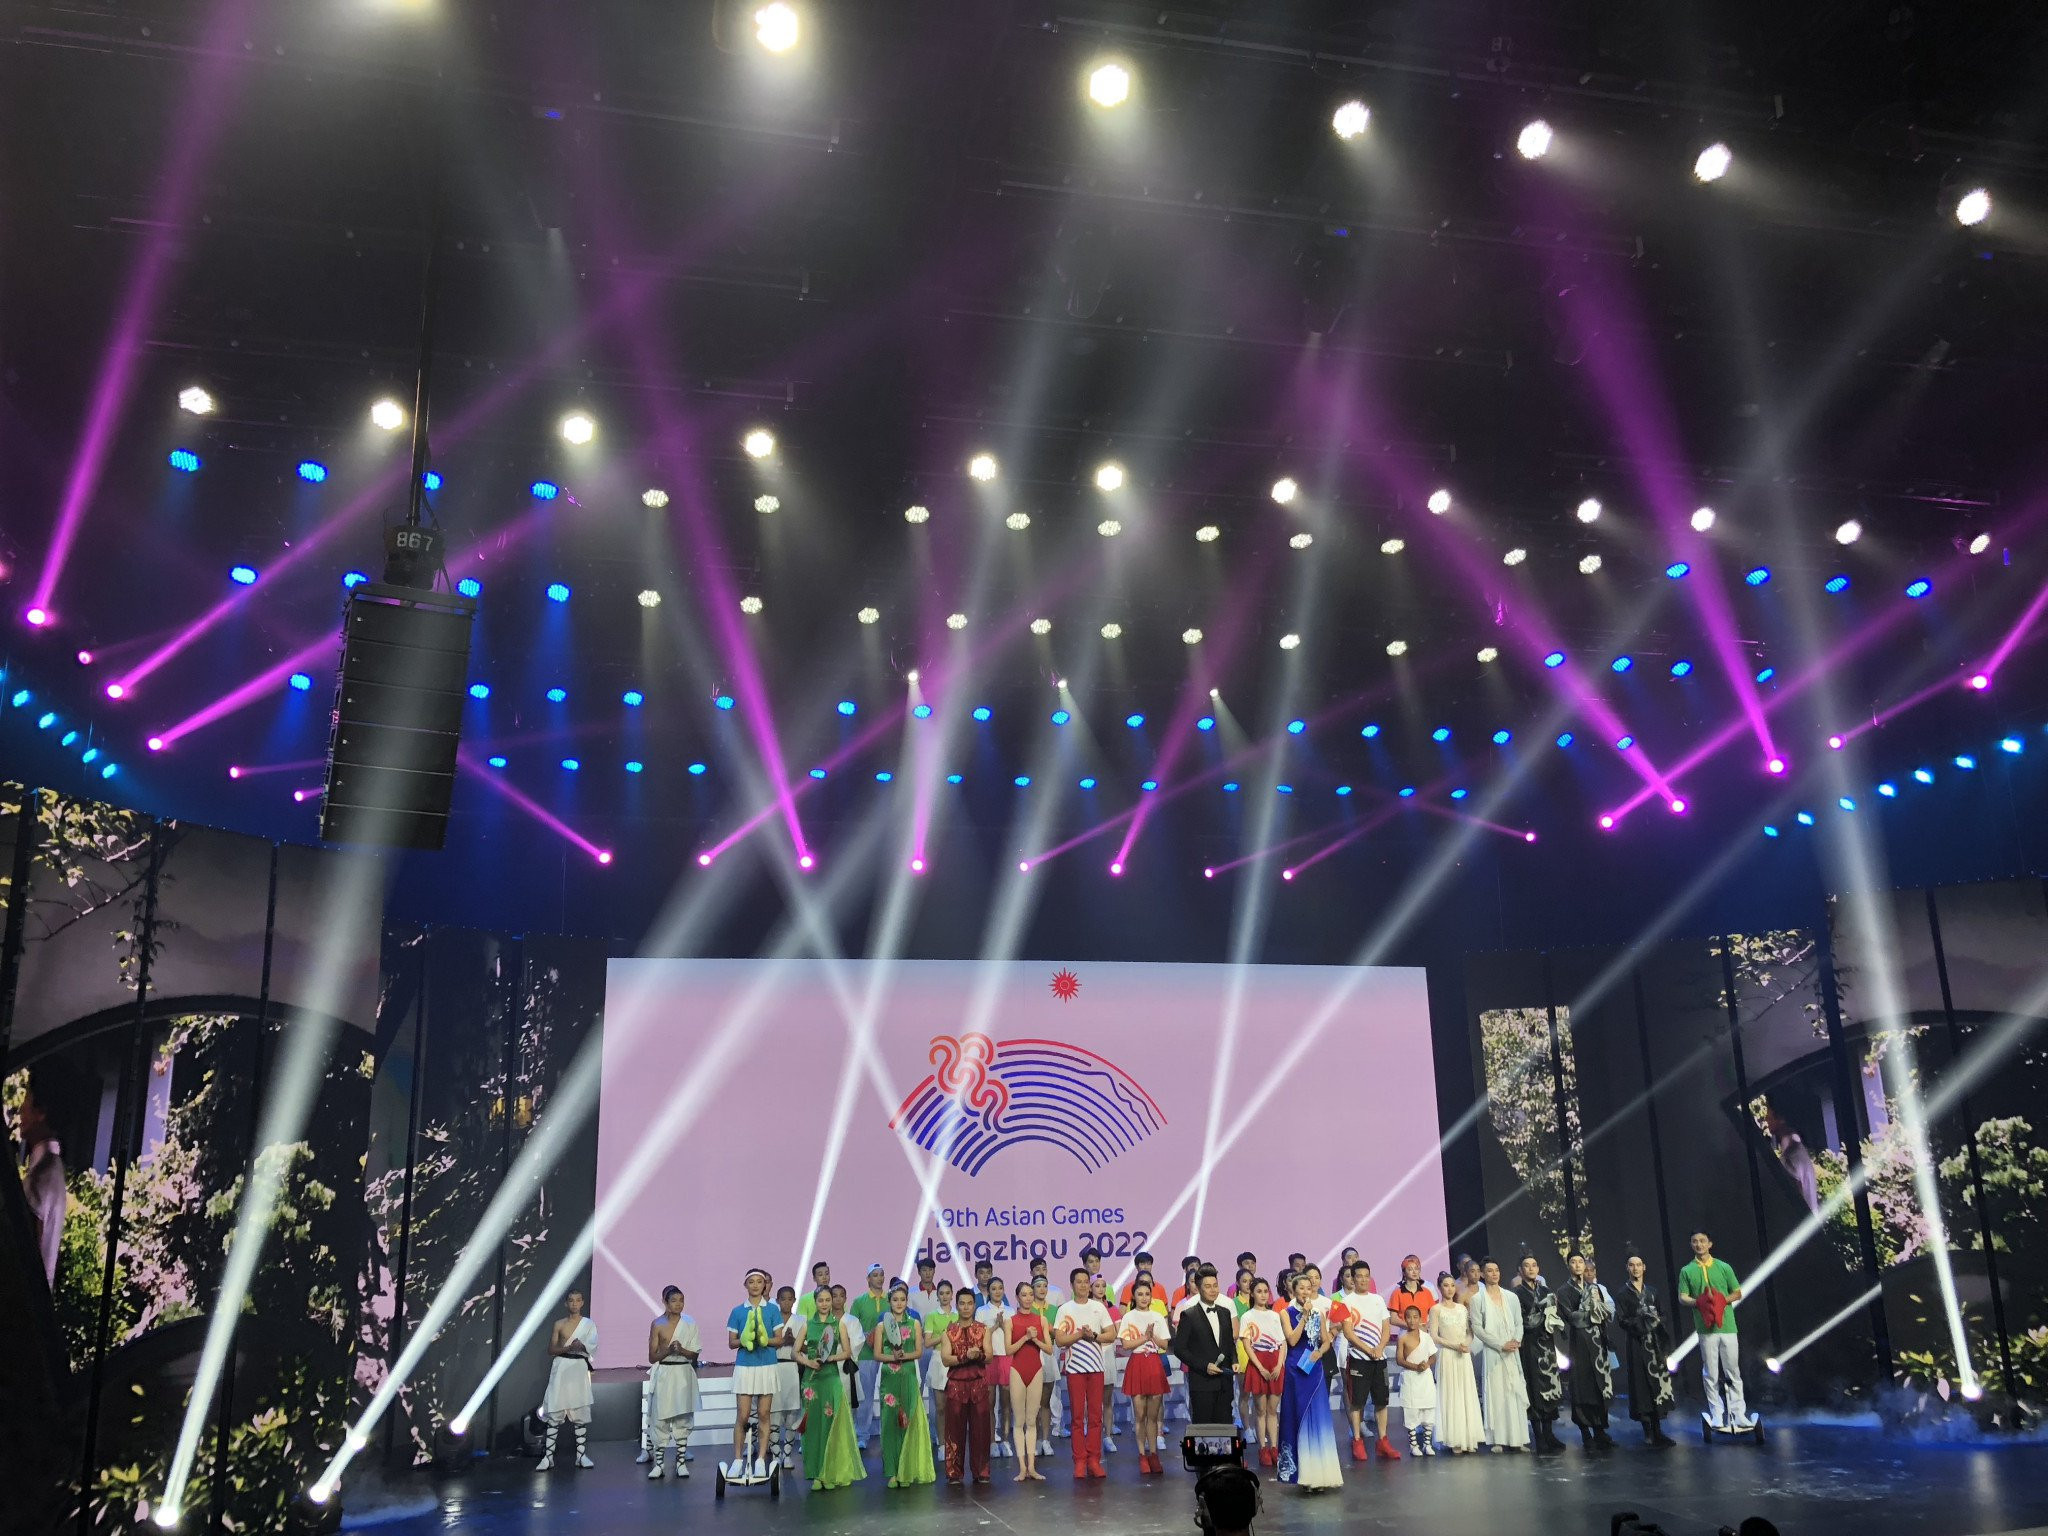 The poem was aimed at introducing Hangzhou to athletes ahead of the Asian Games in 2022 ©OCA